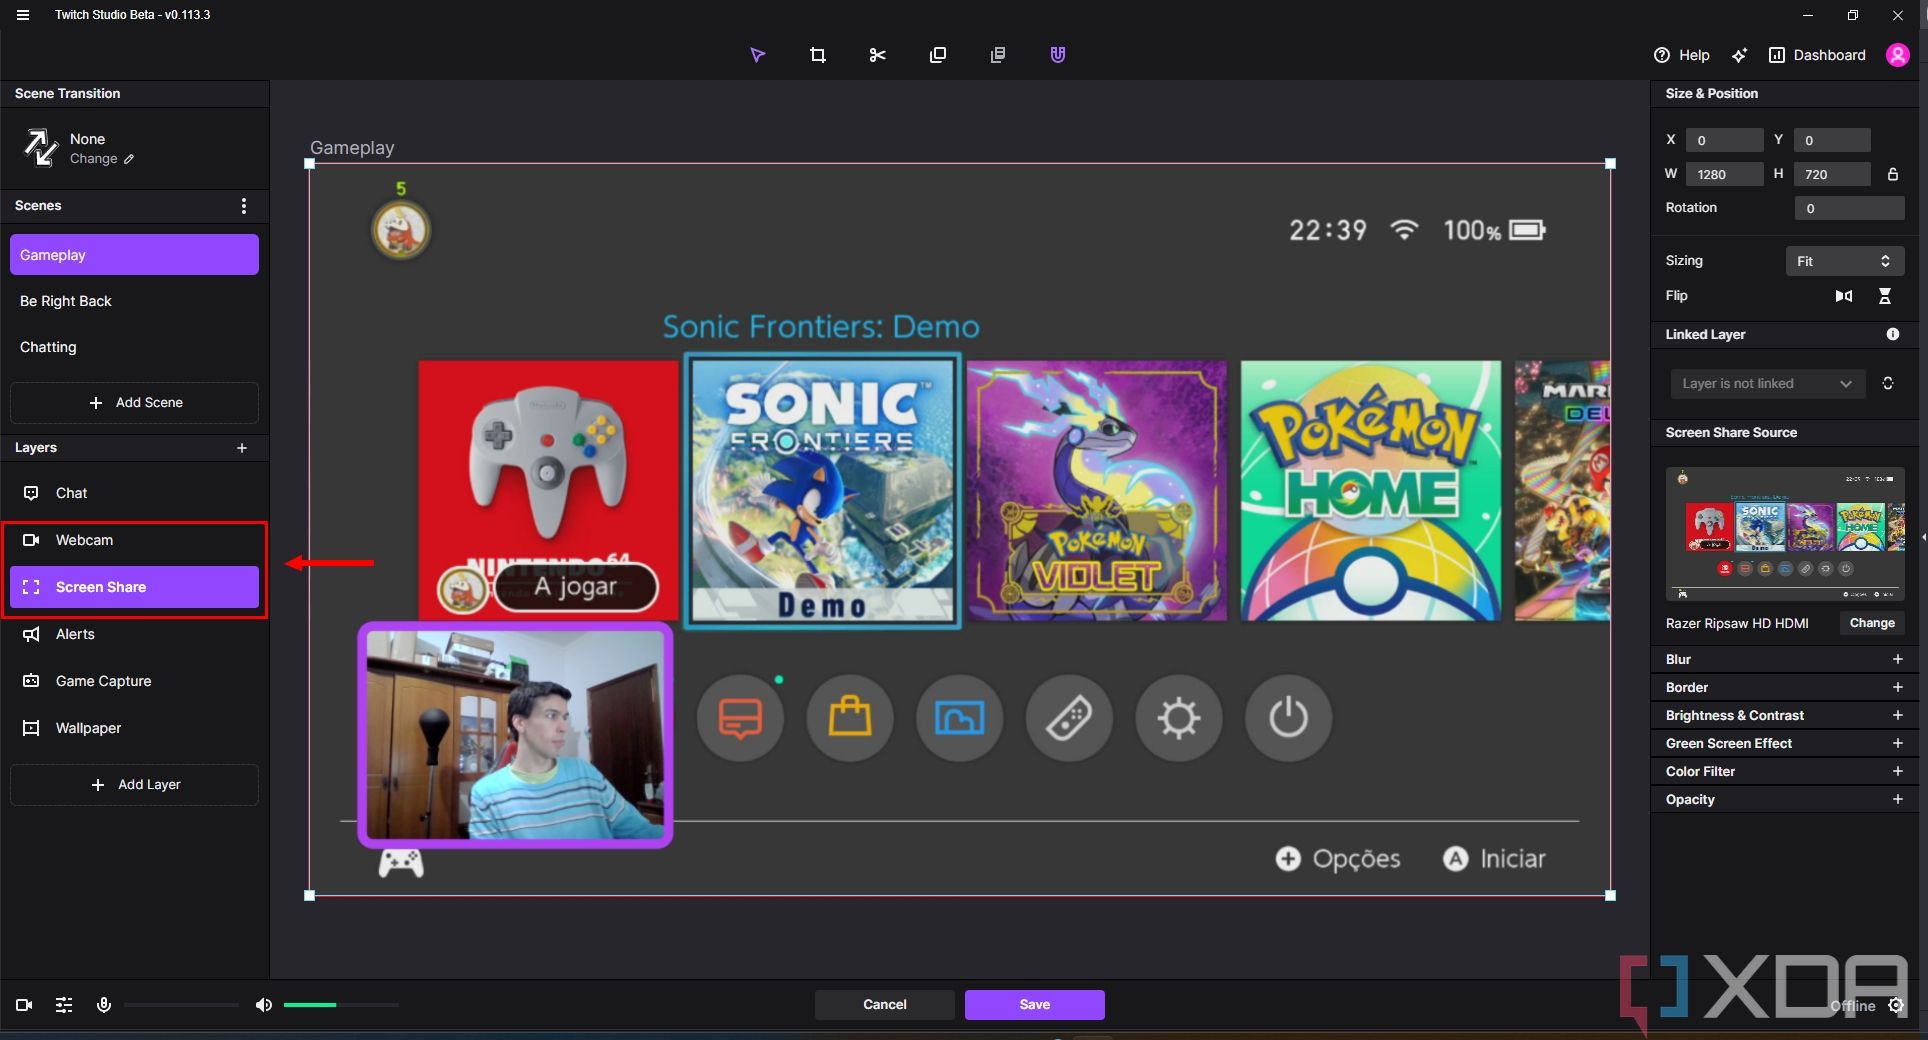 Screenshot of the stream interface in Twitch Studio with the webcam layer above the screen share layer